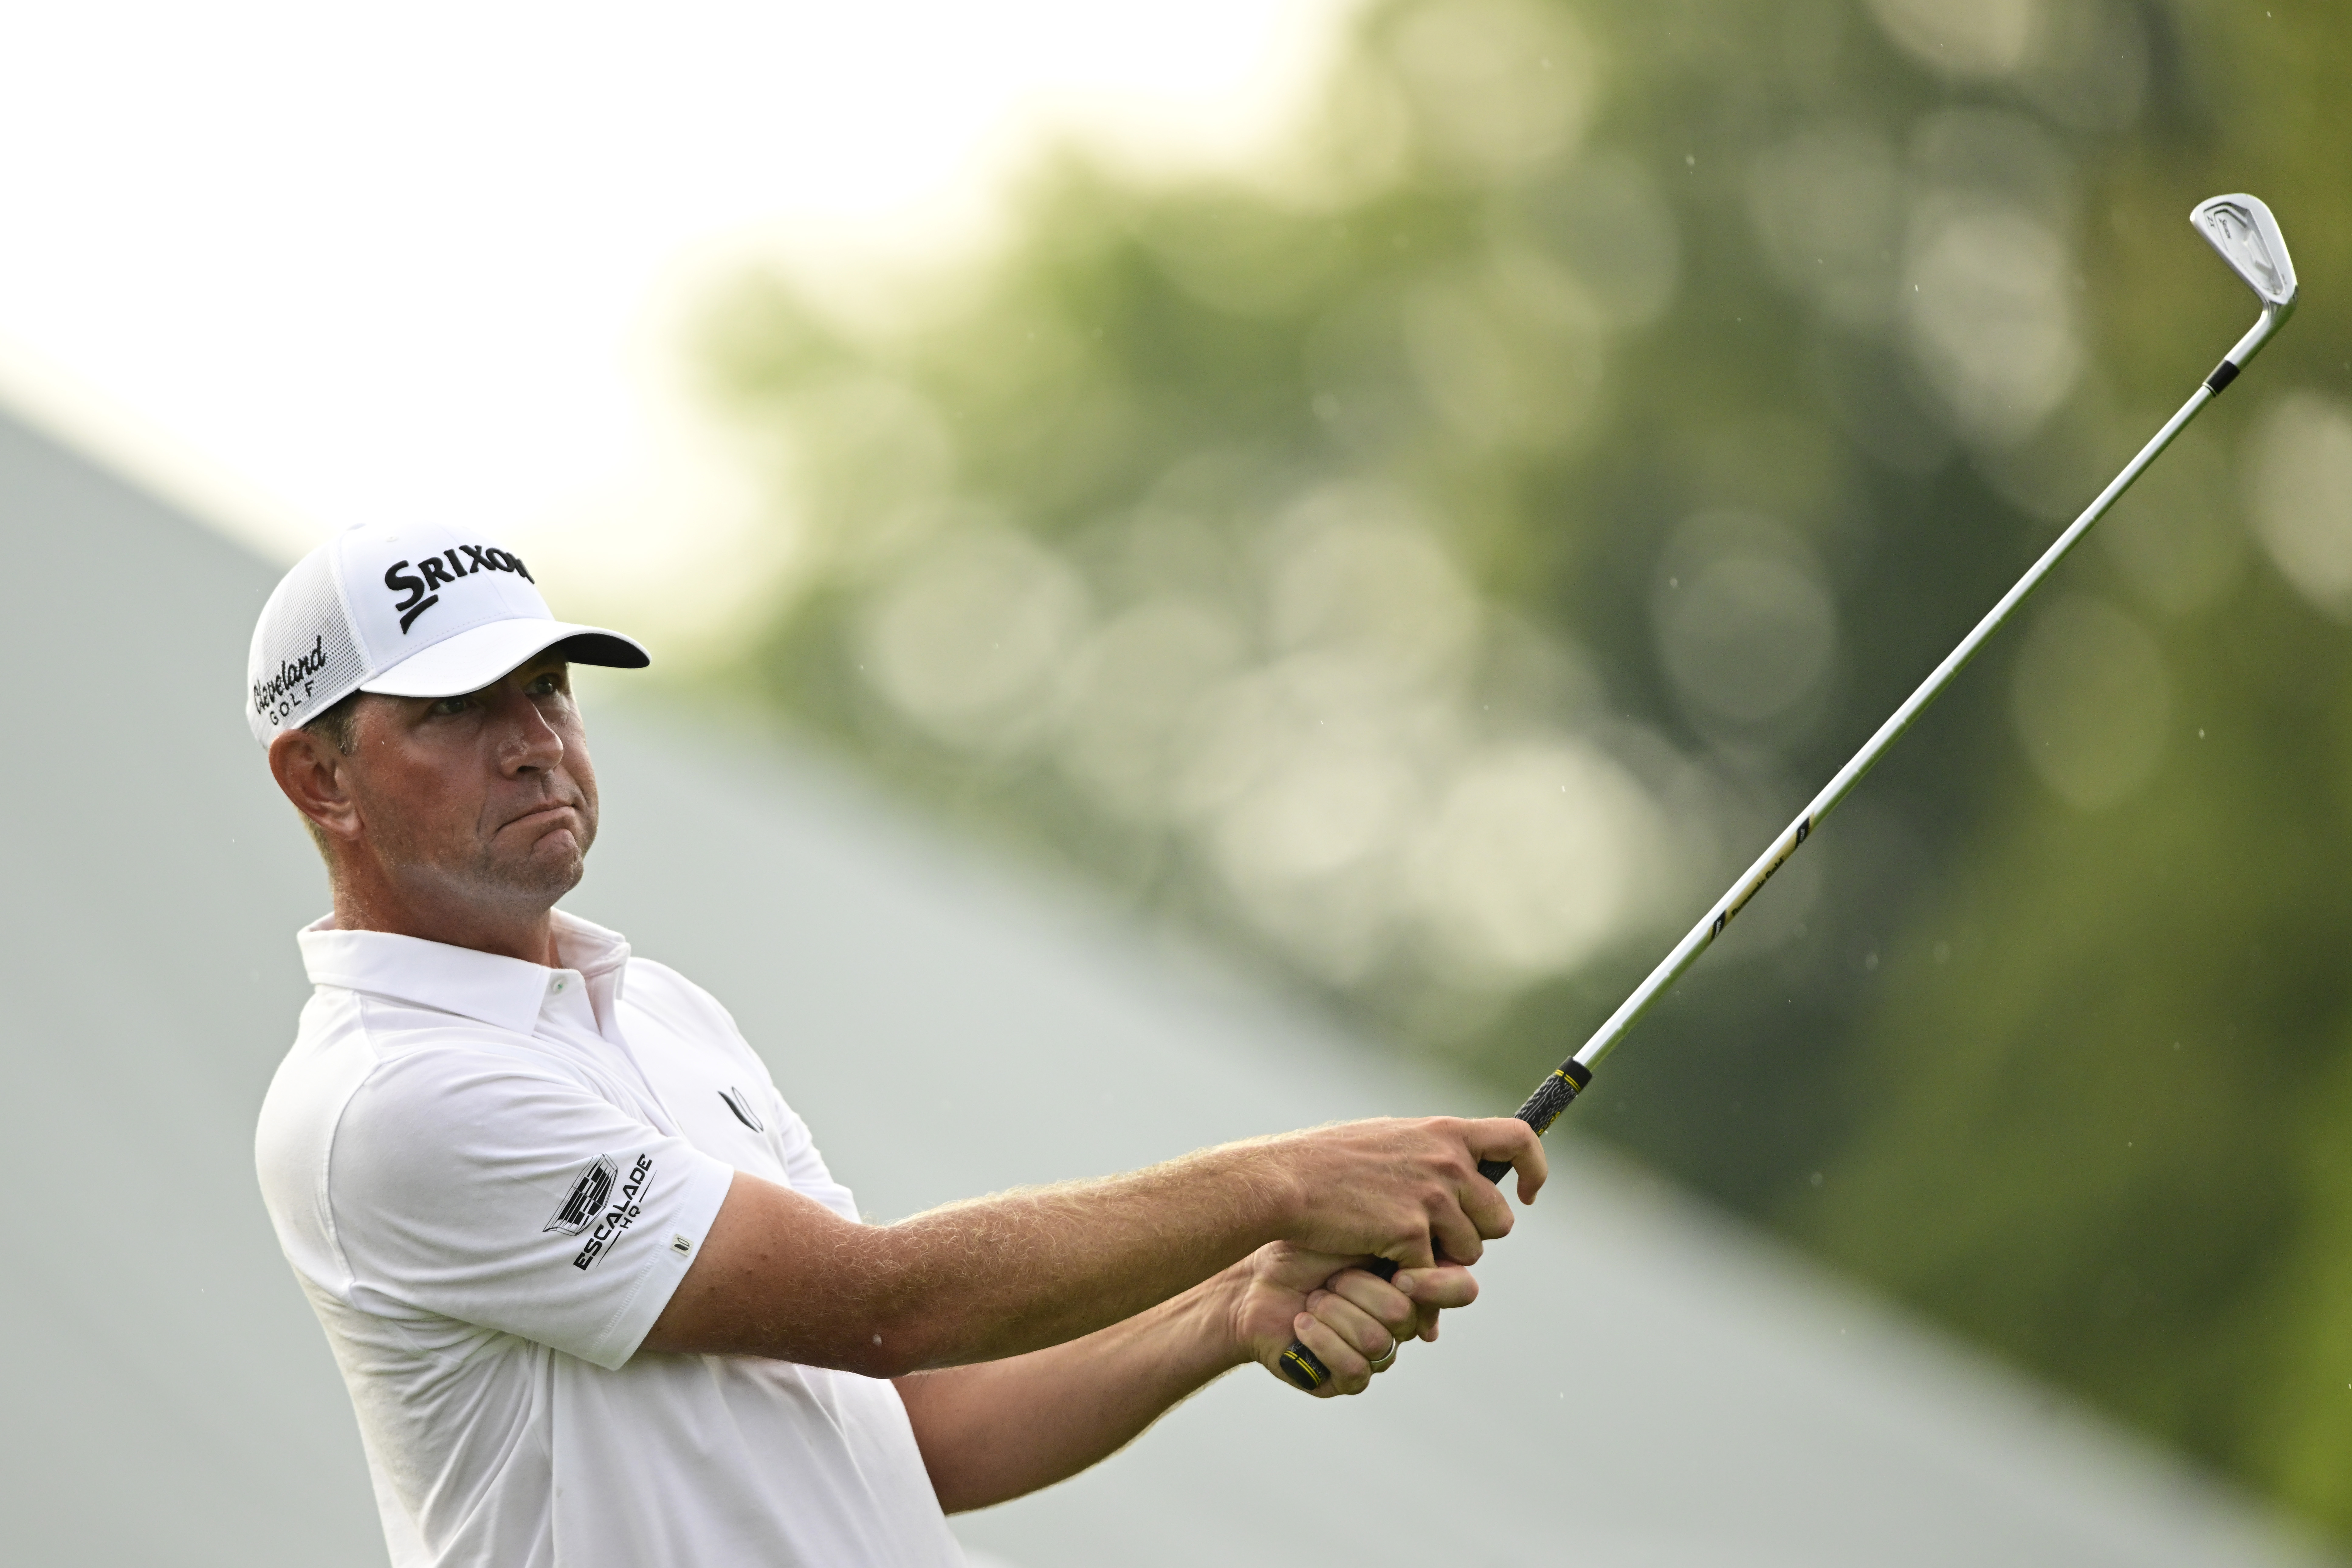 After rain delay, Lucas Glover pours it on to win PGAs Wyndham Championship and qualify for playoffs